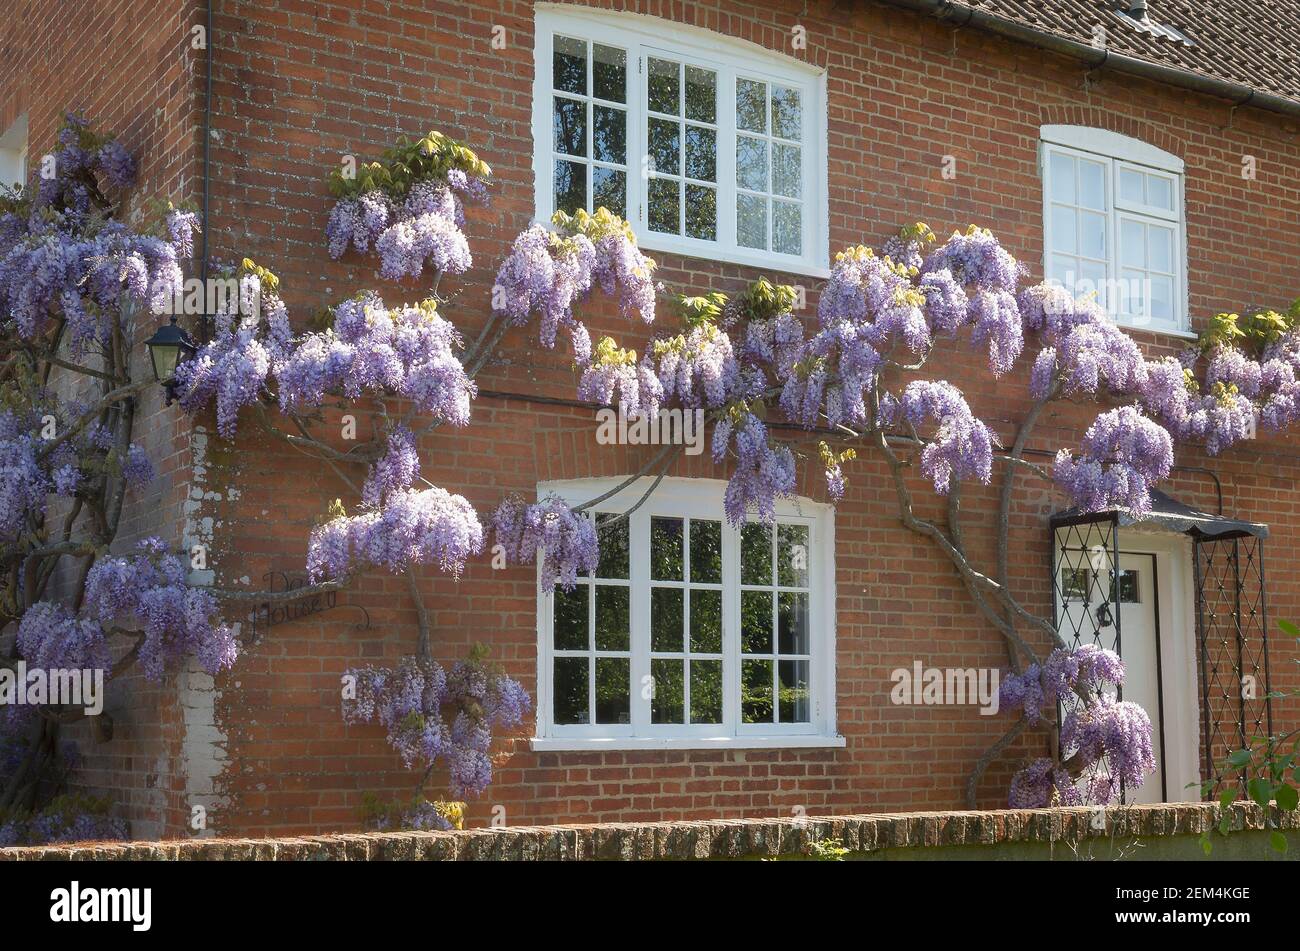 Wisteria sinensis growing up the walls and flowering adding beauty to an old Victorian farmhouse in England UK Stock Photo